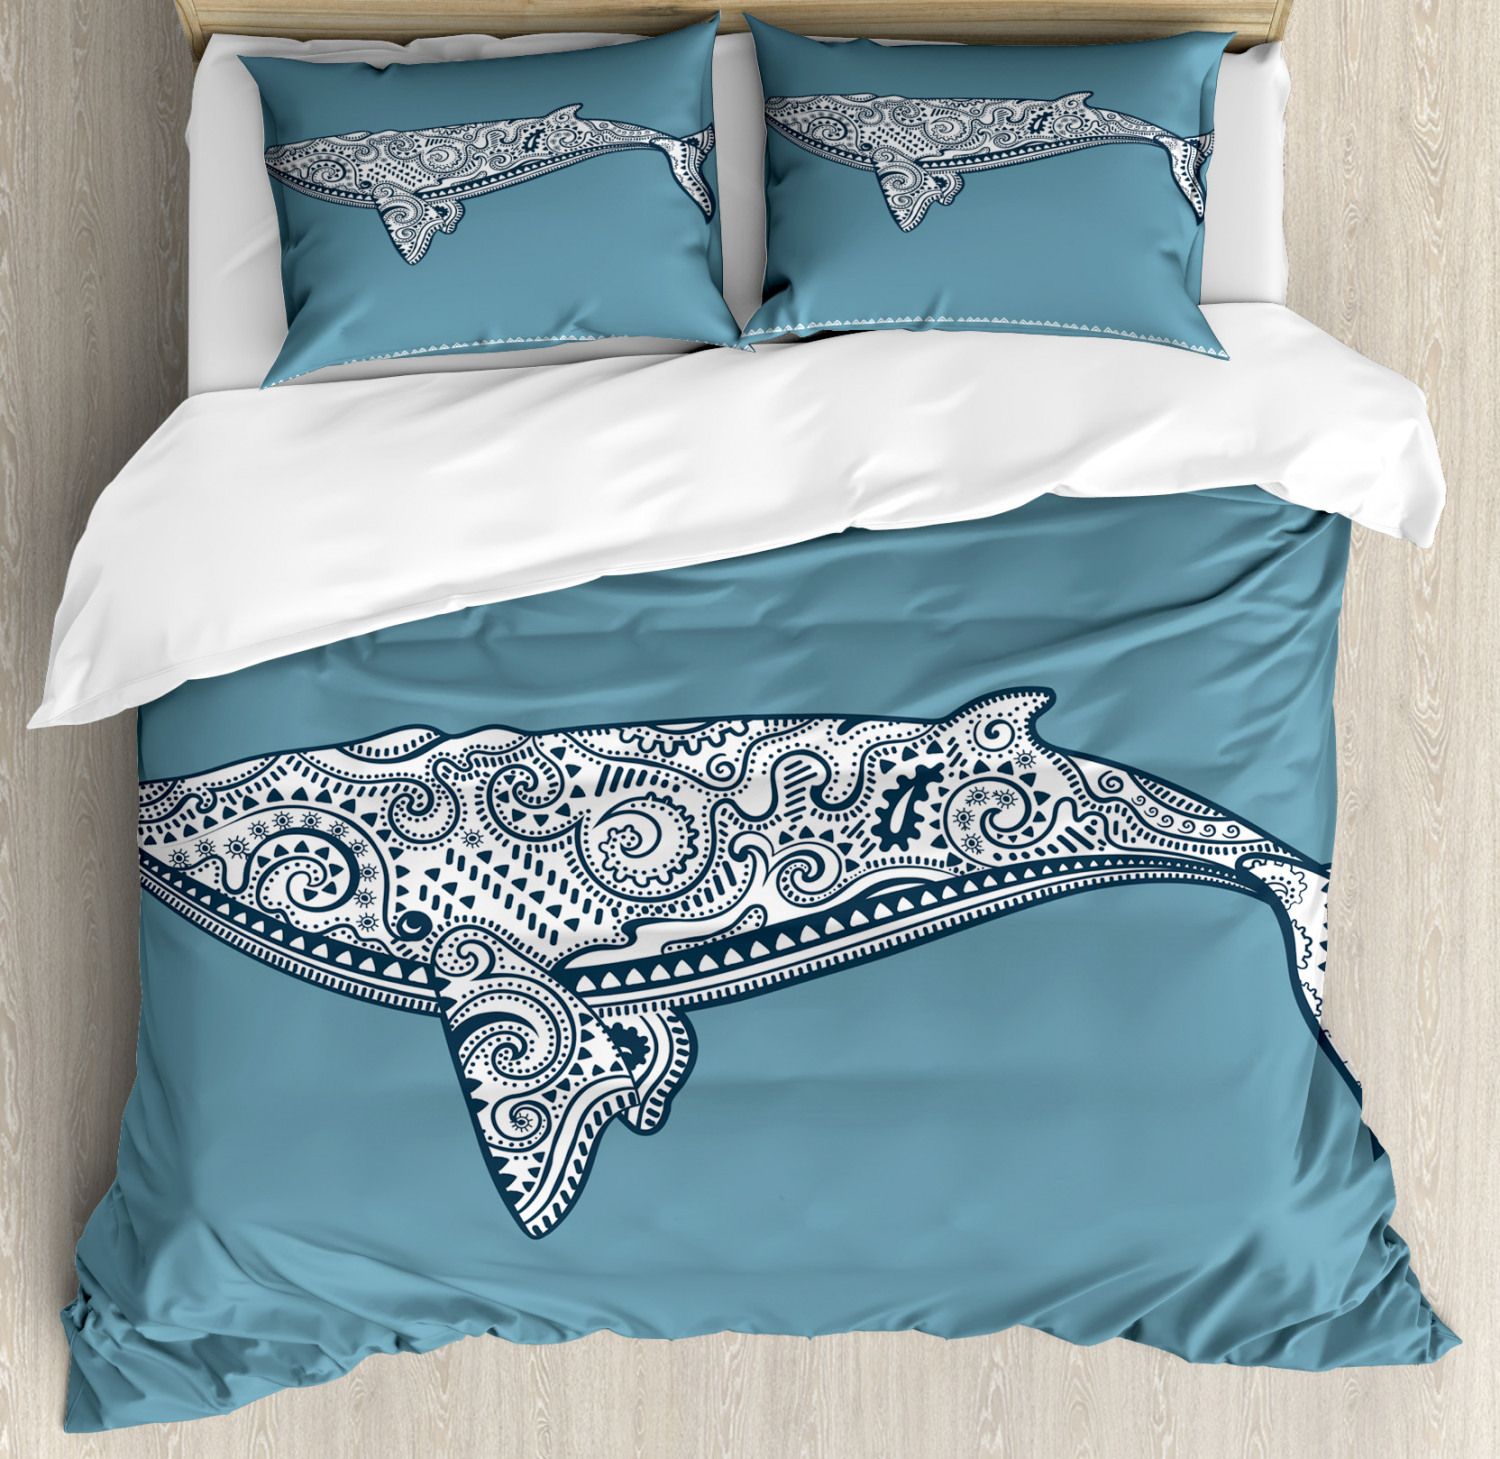 Nautical Duvet Cover Set With Pillow Shams Ethnic Embellish Whale